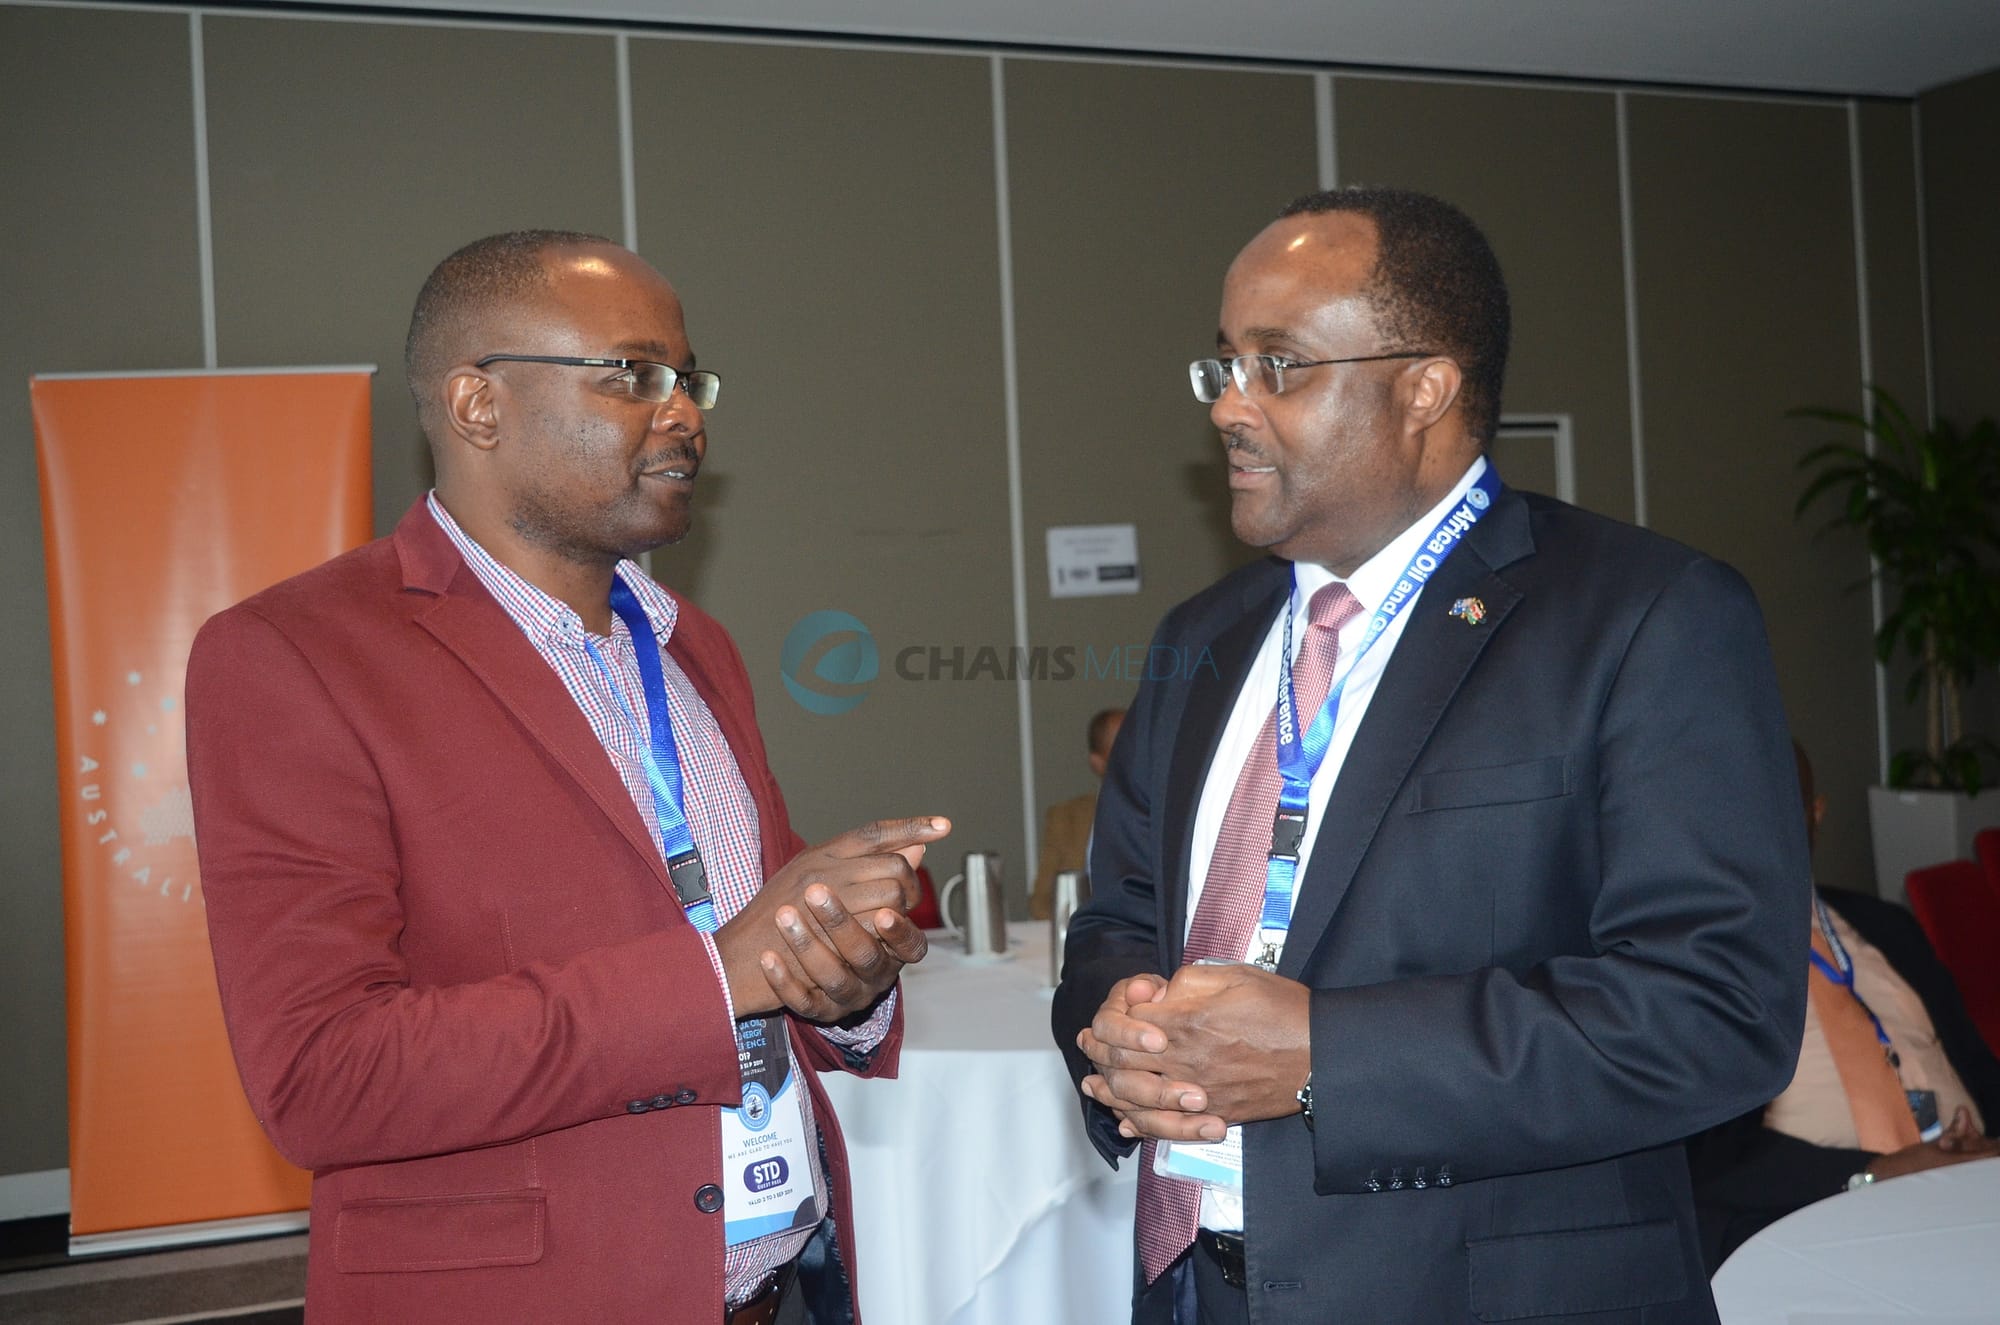 CHAM Media CEO with Kenya's High Commissioner to Australia and New Zealand Isaiya Kabira in Perth City in September 2019 during the Africa Oil, Gas and Energy Conference